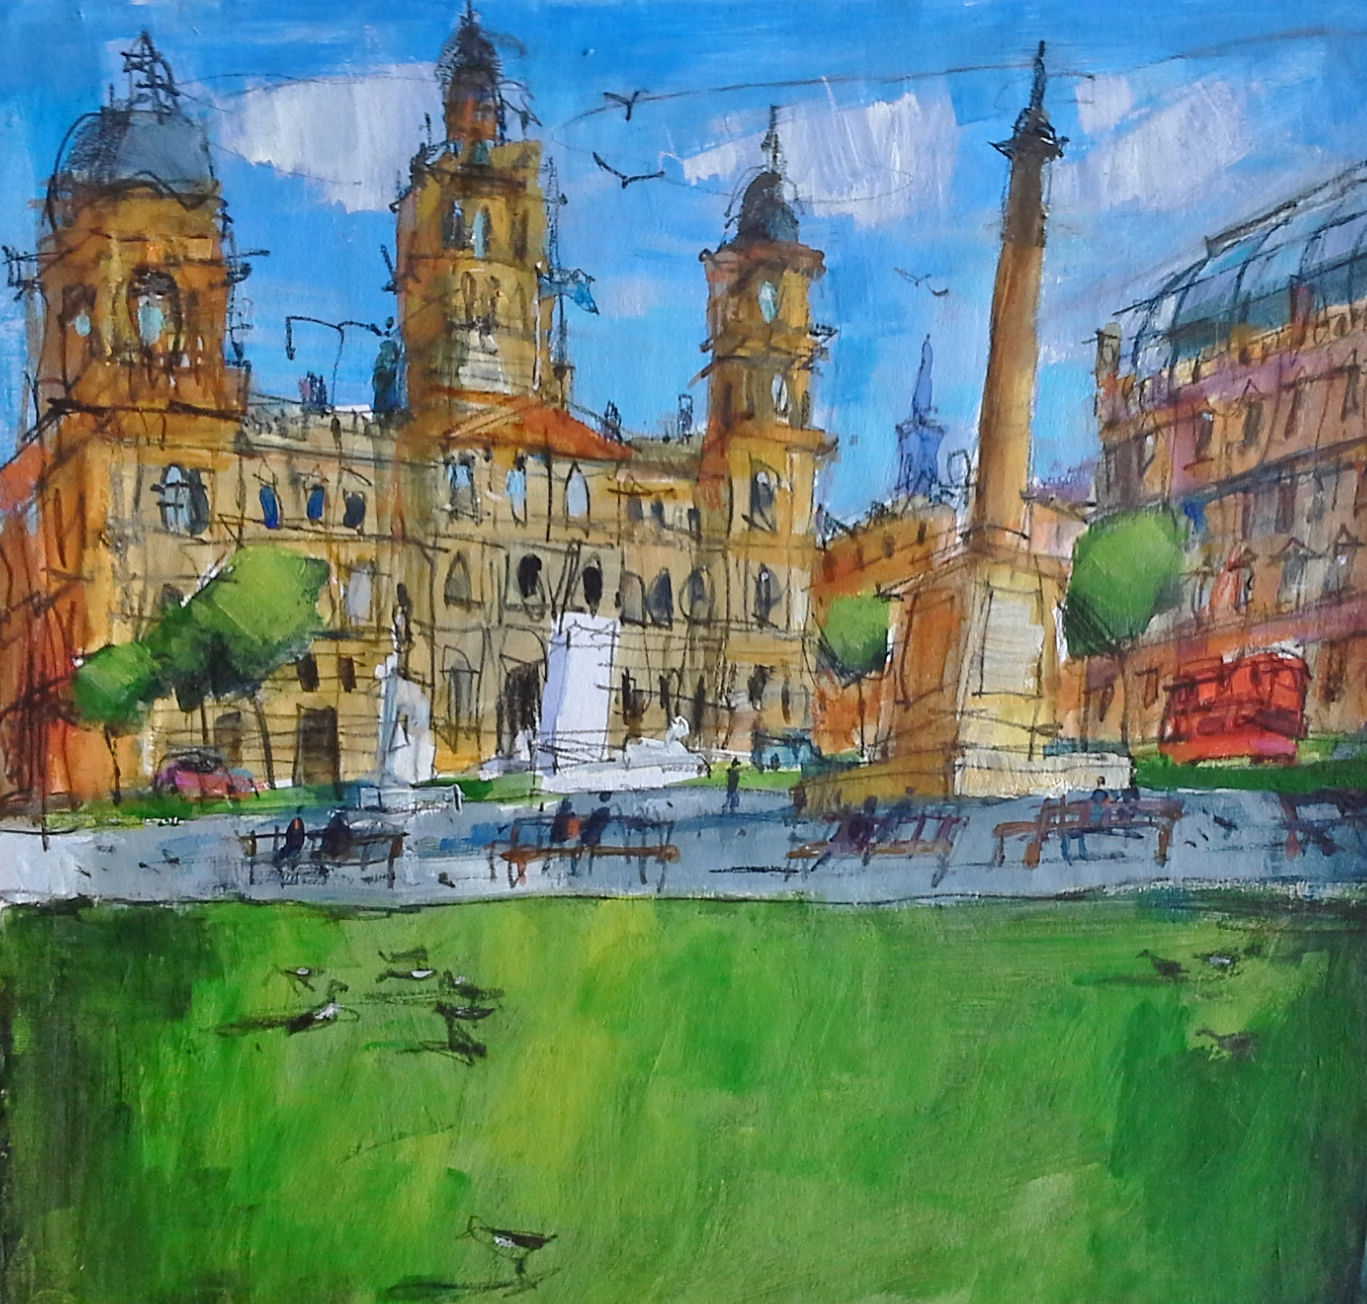 'George Square' by artist Ron Eardley